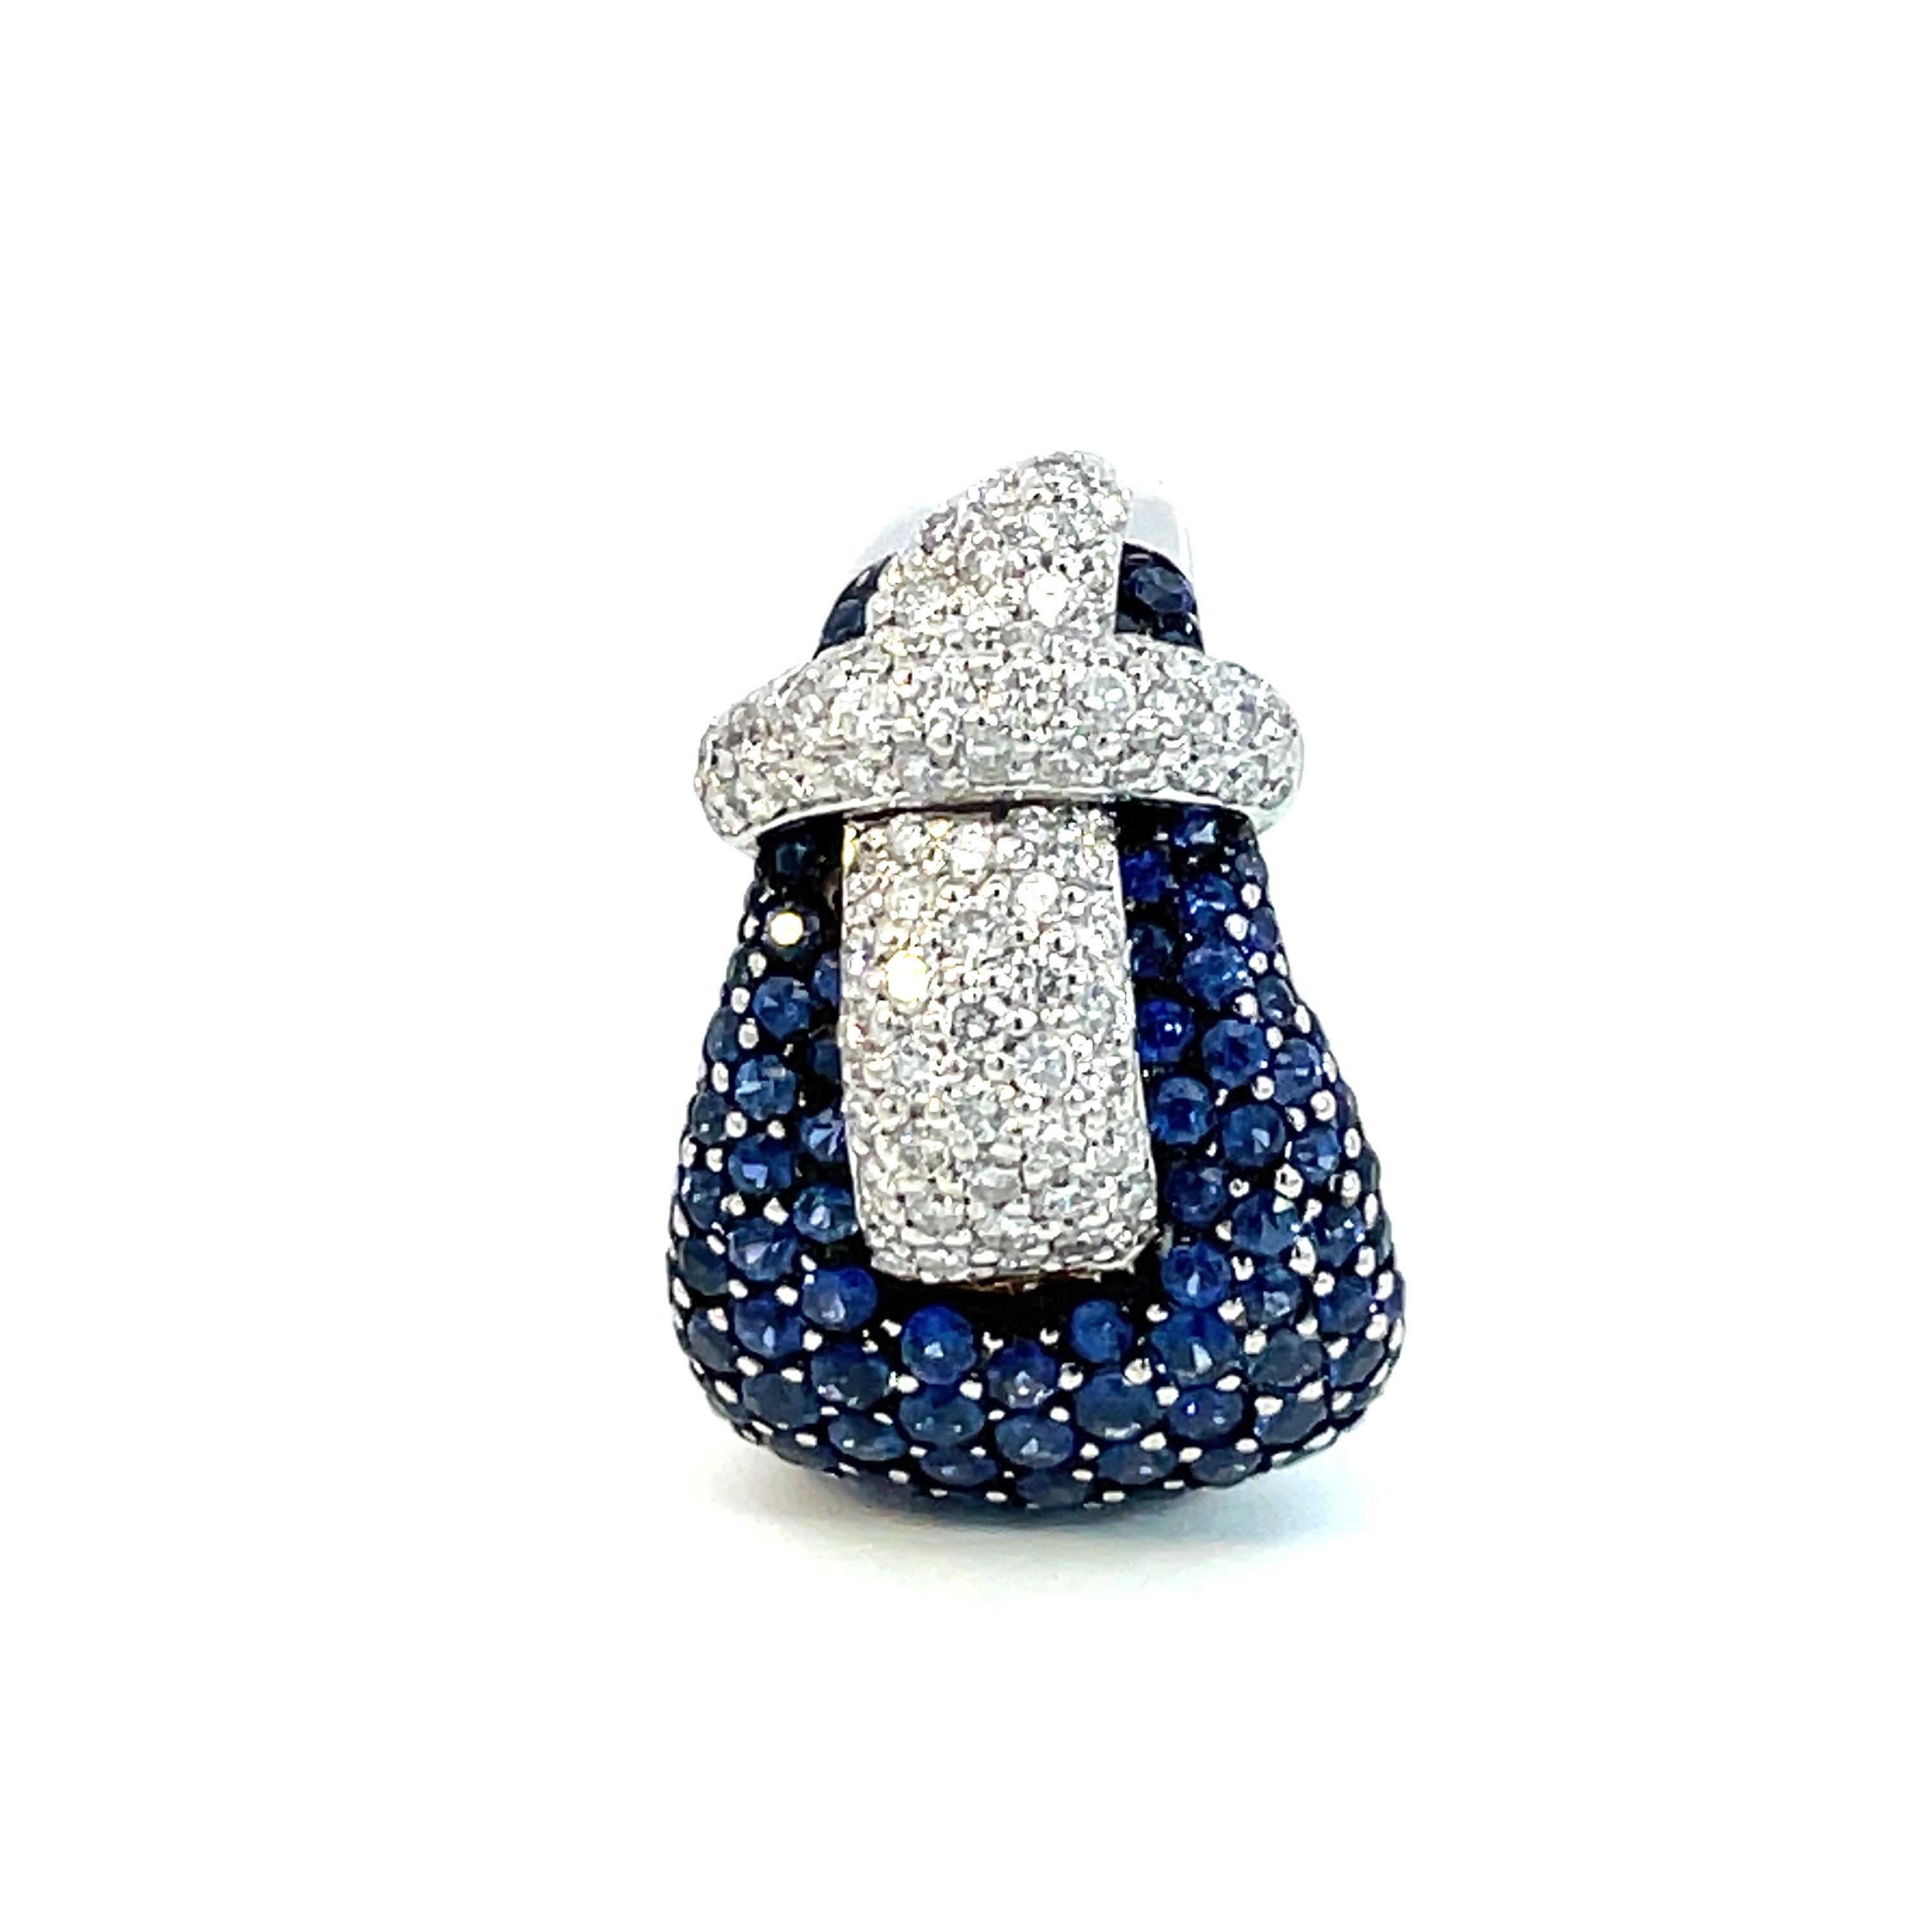 One natural blue sapphire and natural diamond Buckle Ring meticulously set with only the deepest blue sapphires and finest quality brilliant cut diamonds.

98 round cut natural blue sapphires weighing 3.40ct total weight

80 brilliant cut diamonds